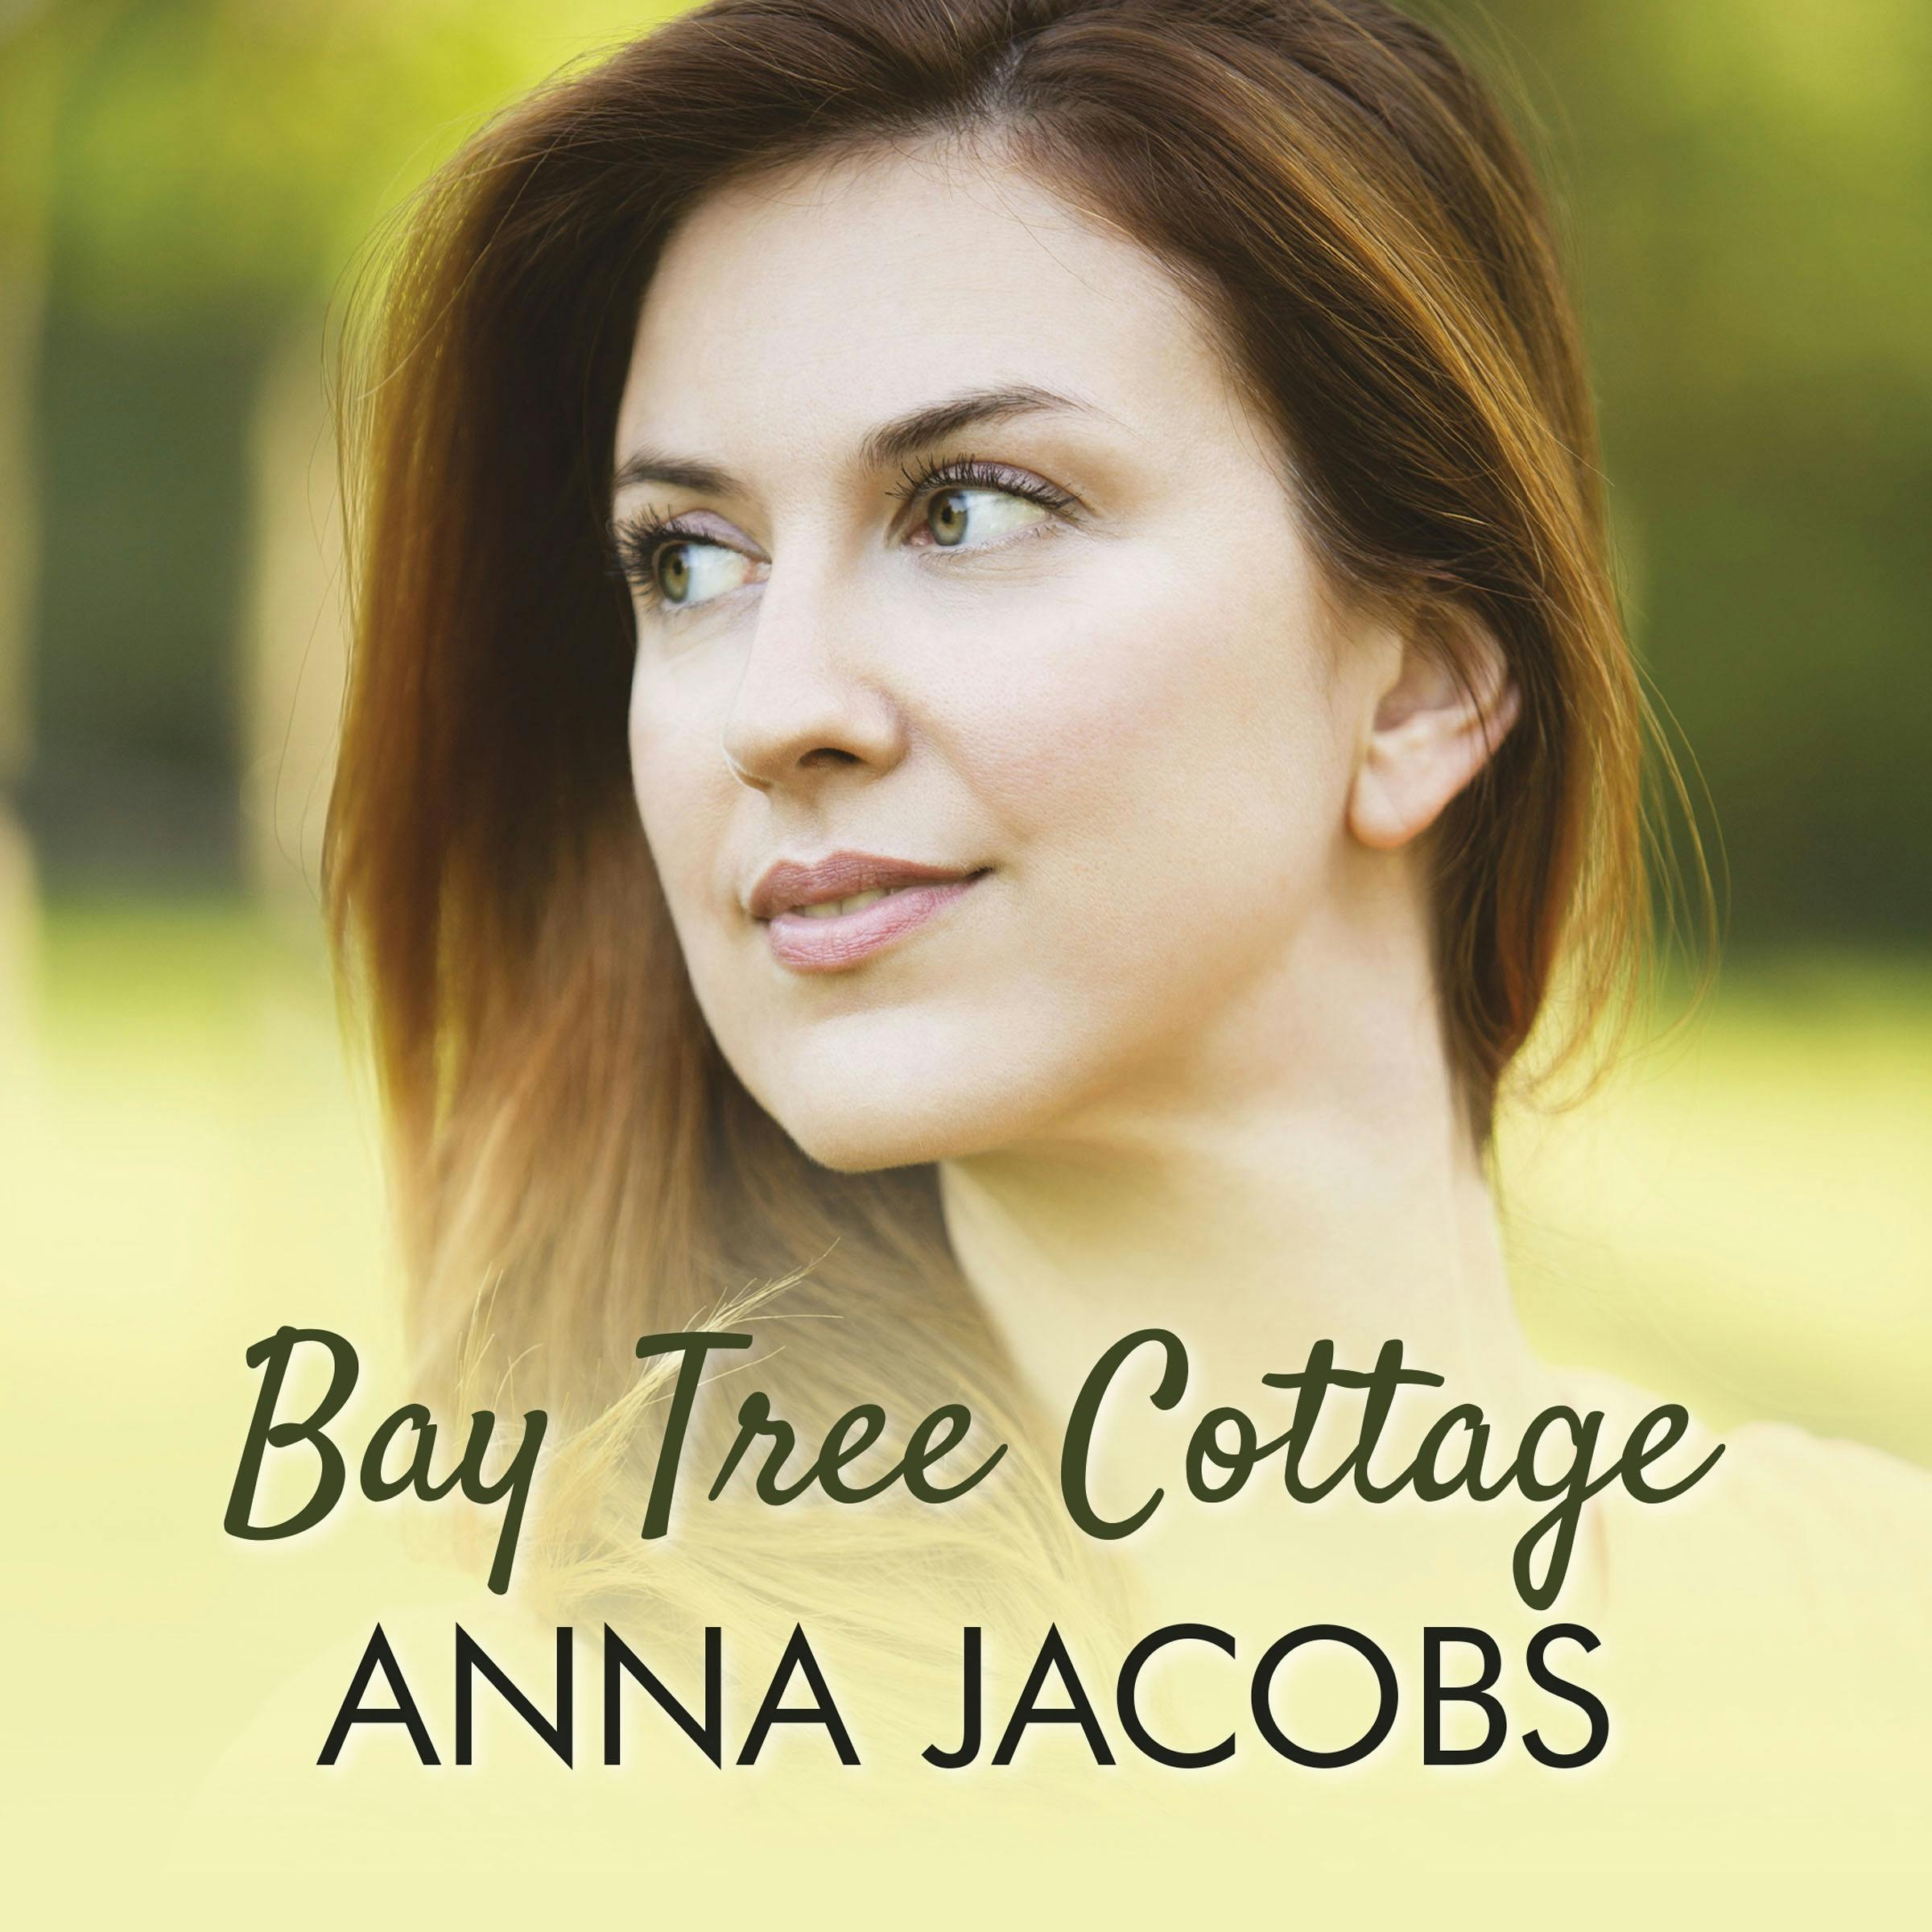 Bay Tree Cottage - Anna Jacobs